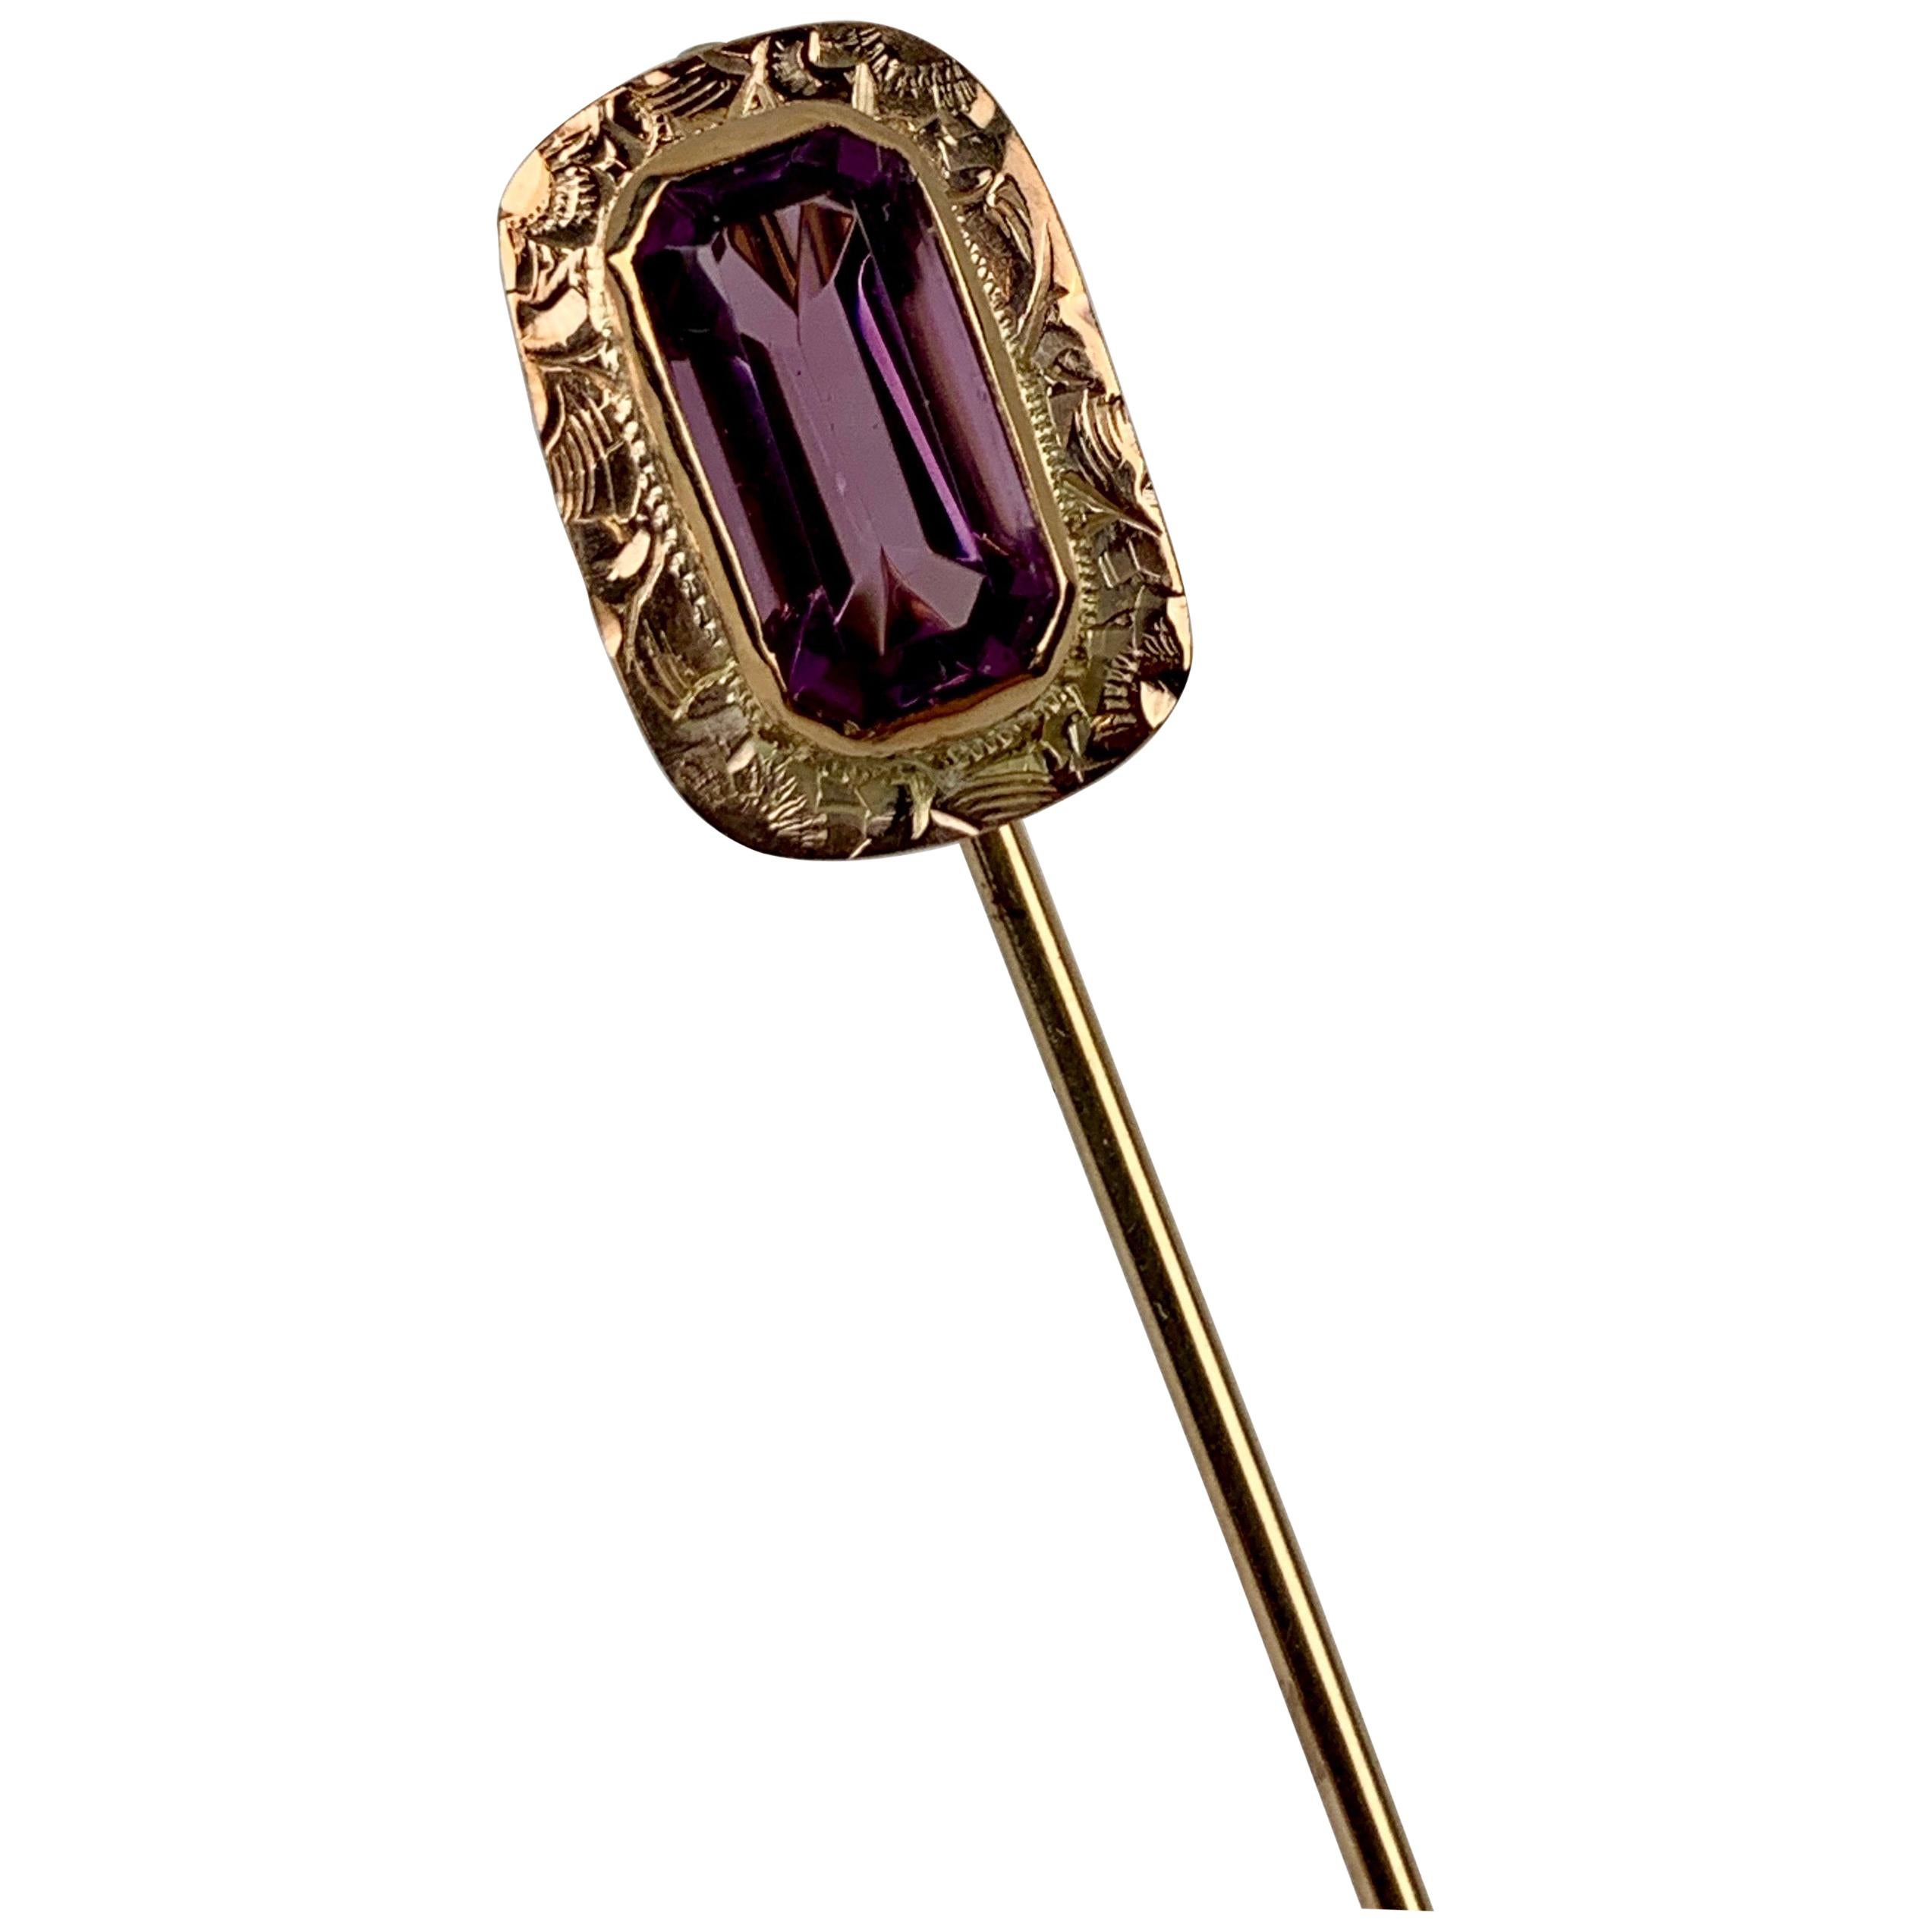 Stickpin with a Rectangular Frame, Faceted Amethyst & Hand Engraved-10k y.g. For Sale